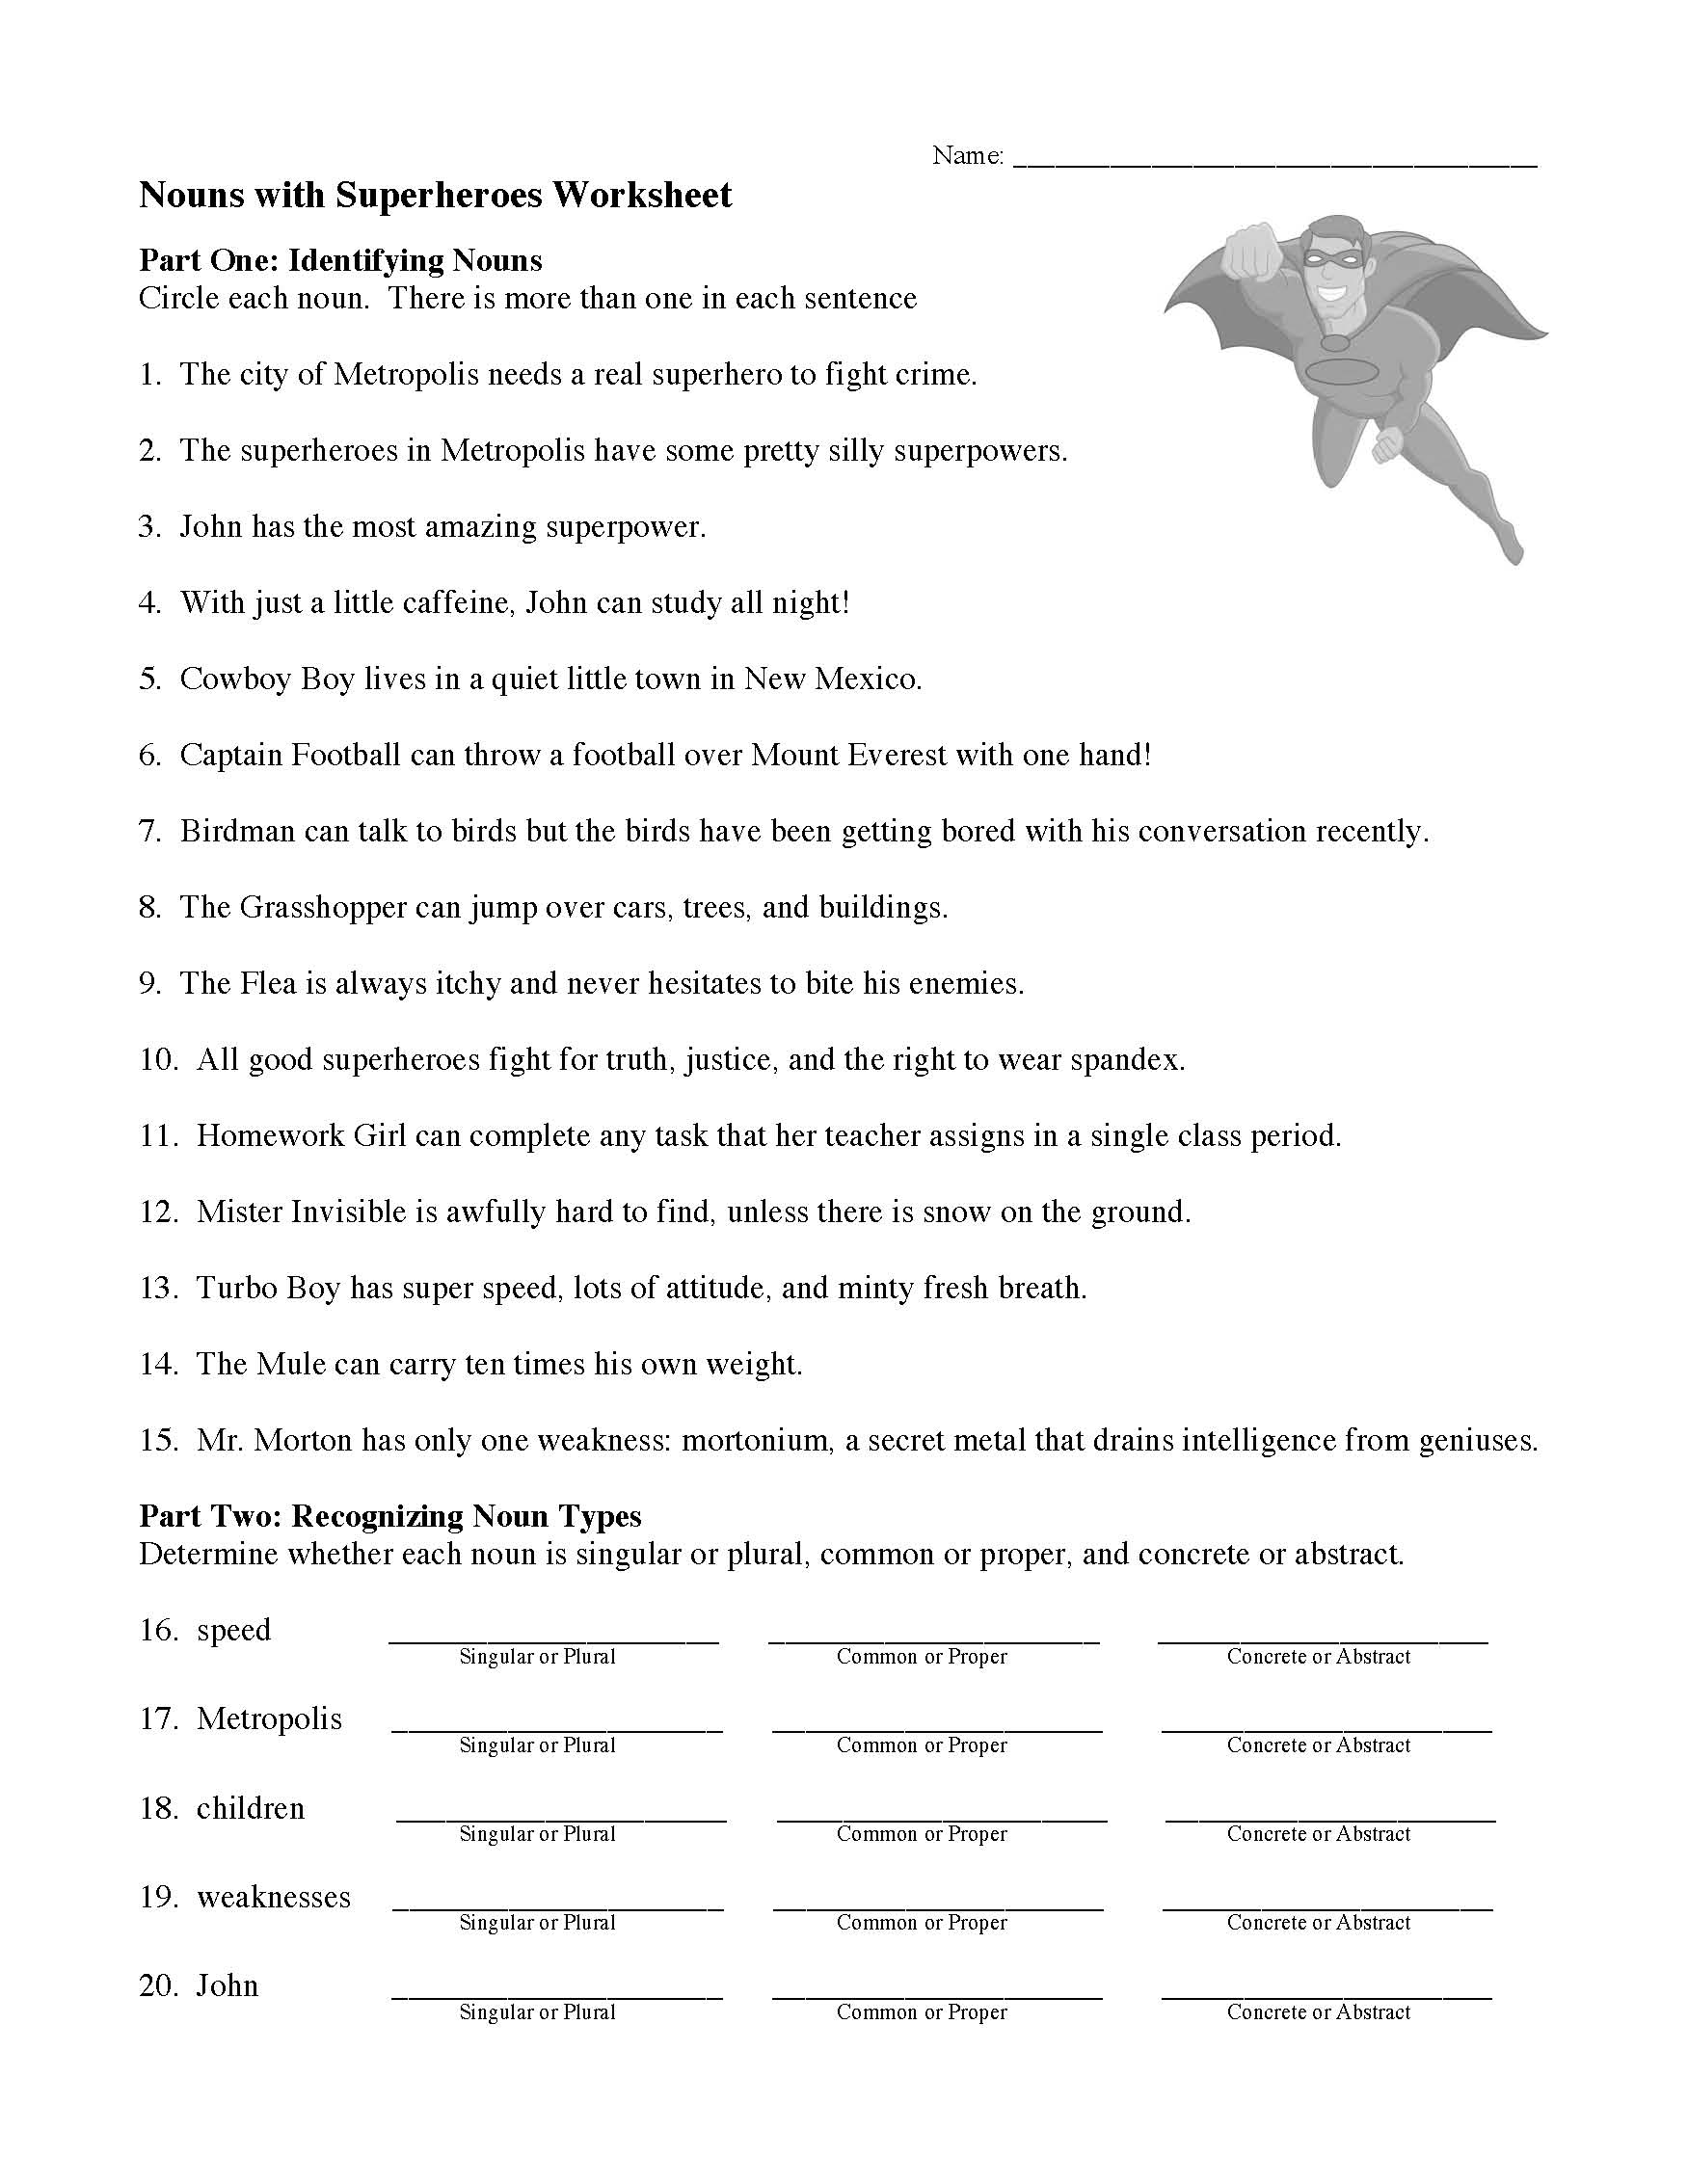 This is a preview image of Nouns Worksheet | "With Superheroes". Click on it to enlarge it or view the source file.